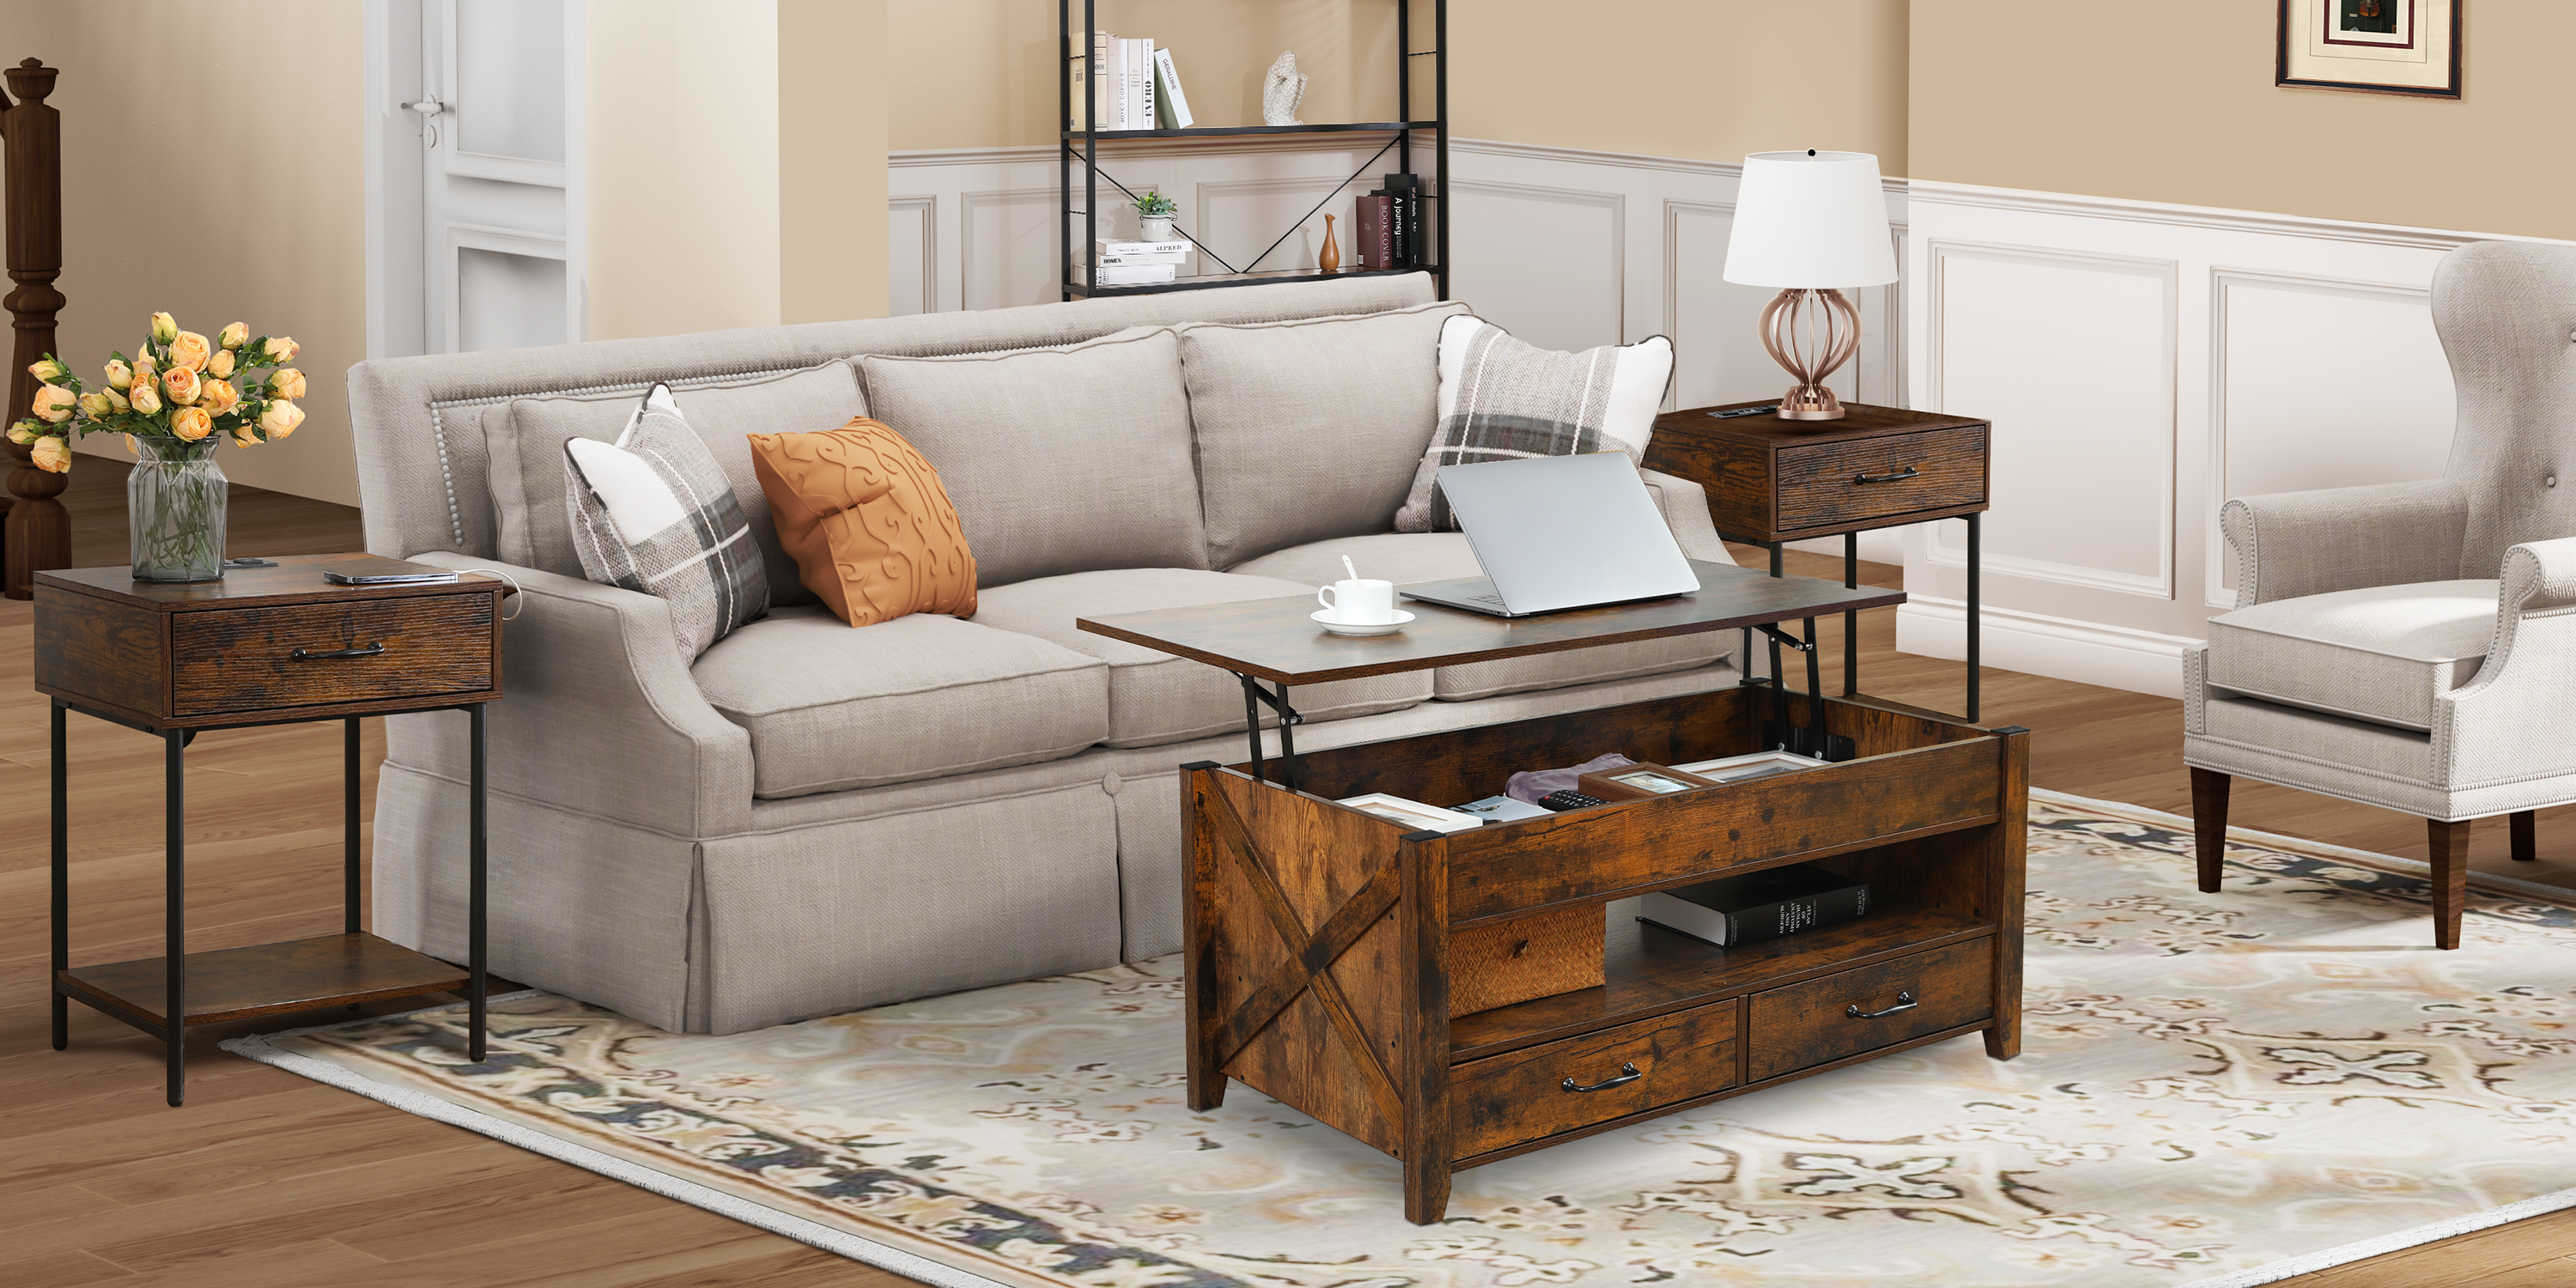 5 Great Ideas for Living Room Storage: Maximize Your Space and Style